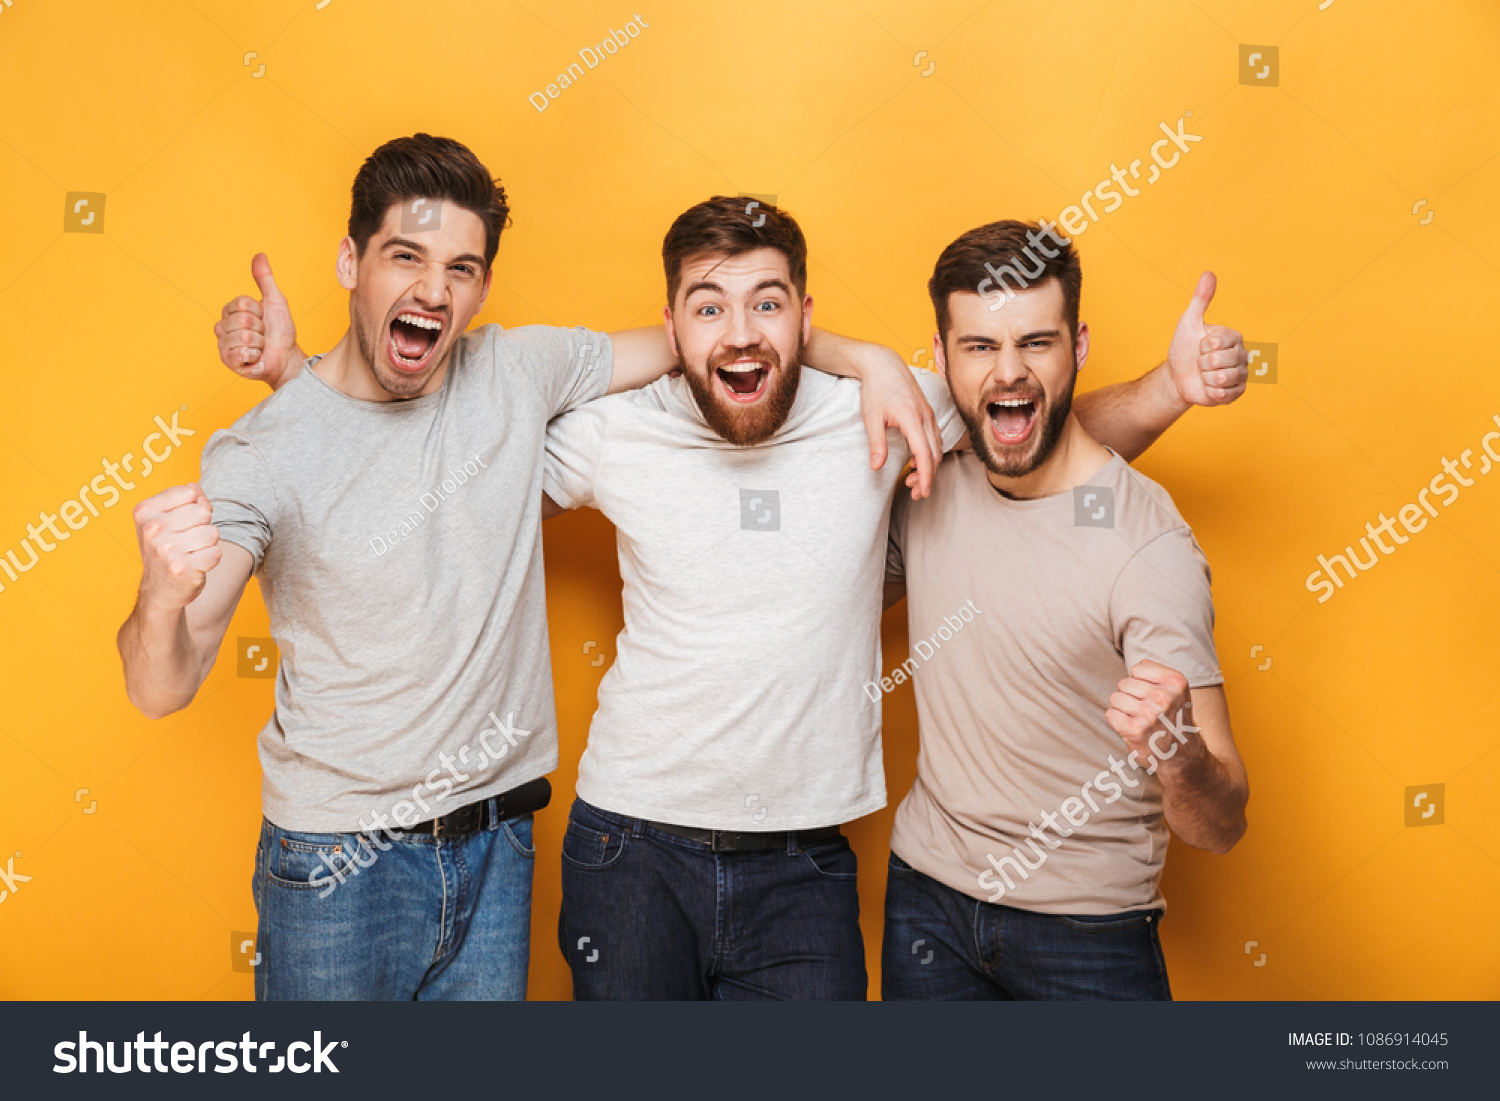 Three young excited men showing thumbs up and celebrating isolated over yellow background #1086914045